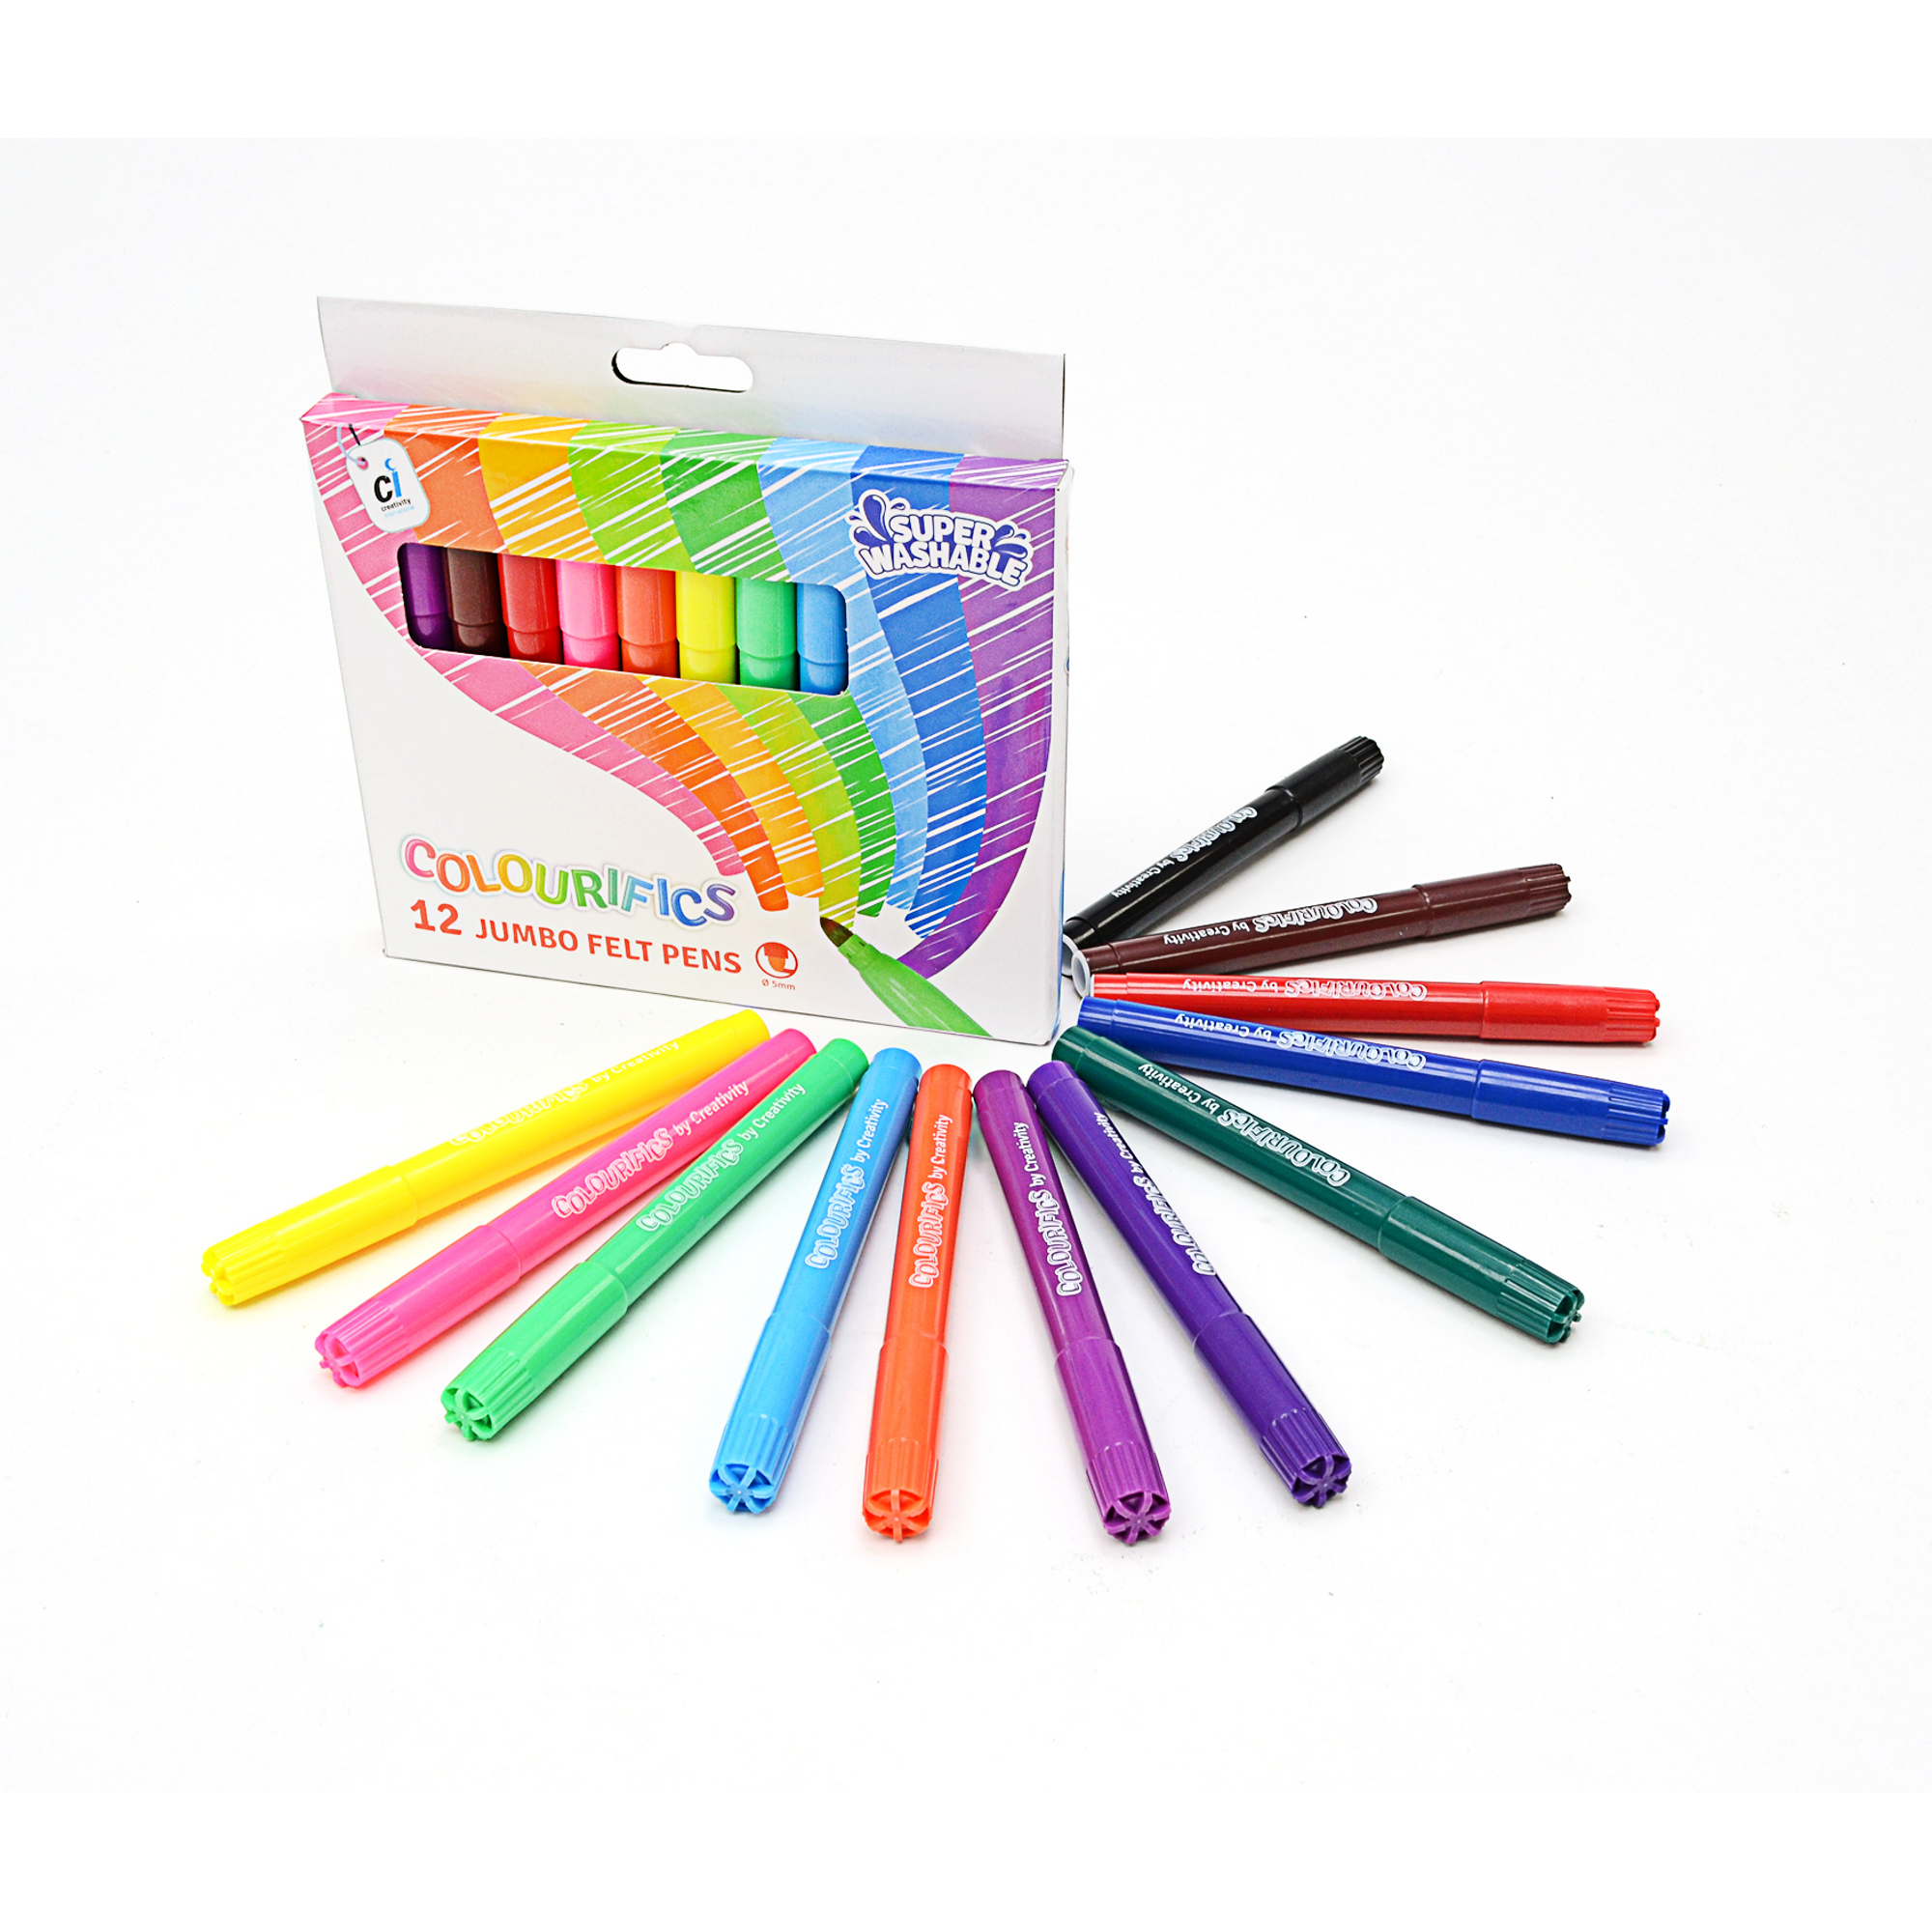 Details about   8x CHUNKY FIBRE PENS Jumbo Felt Tips Large Nibs Drawing Colouring Book Art Craft 